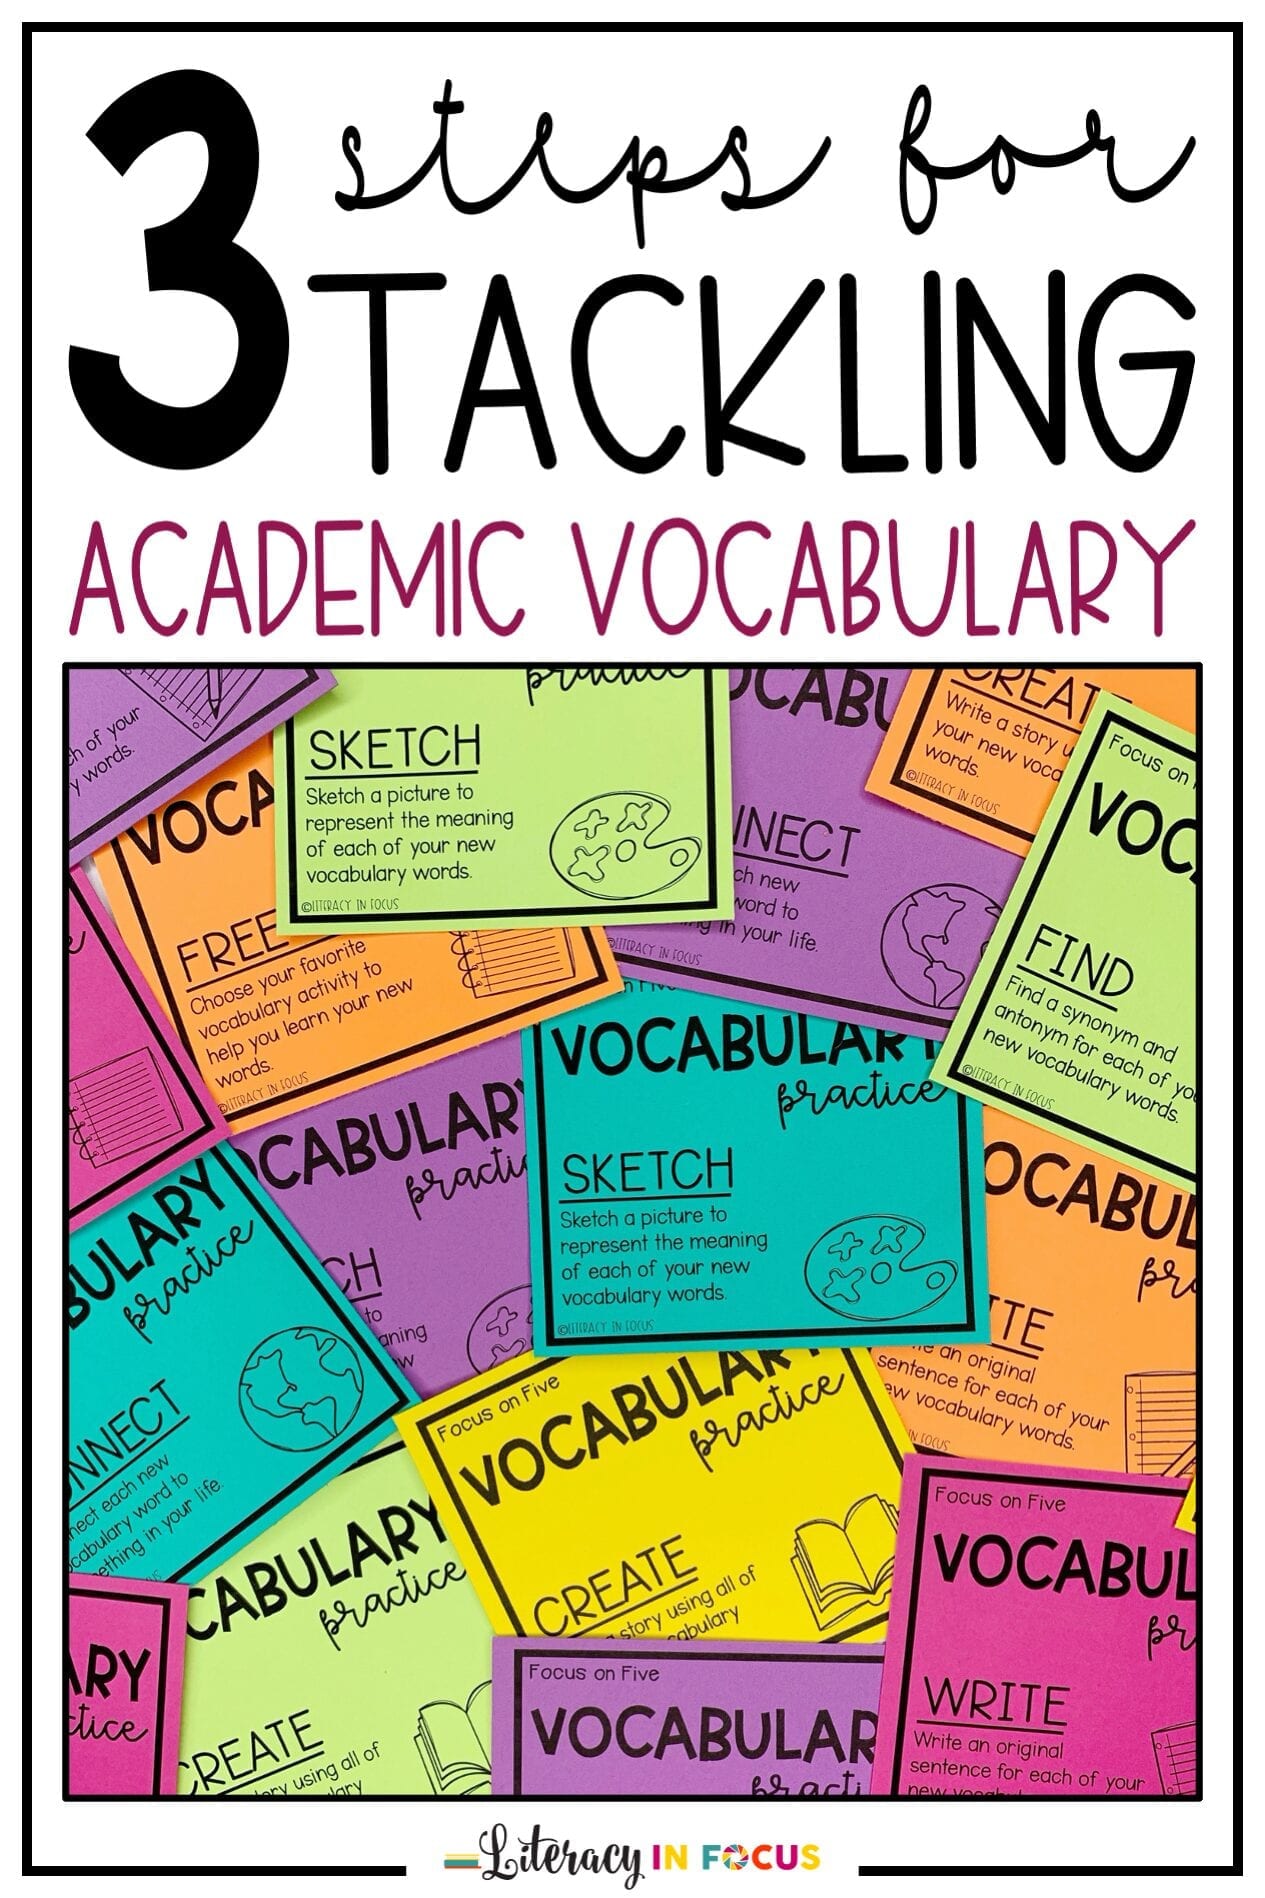 3 Easy Steps for Tackling Academic Vocabulary